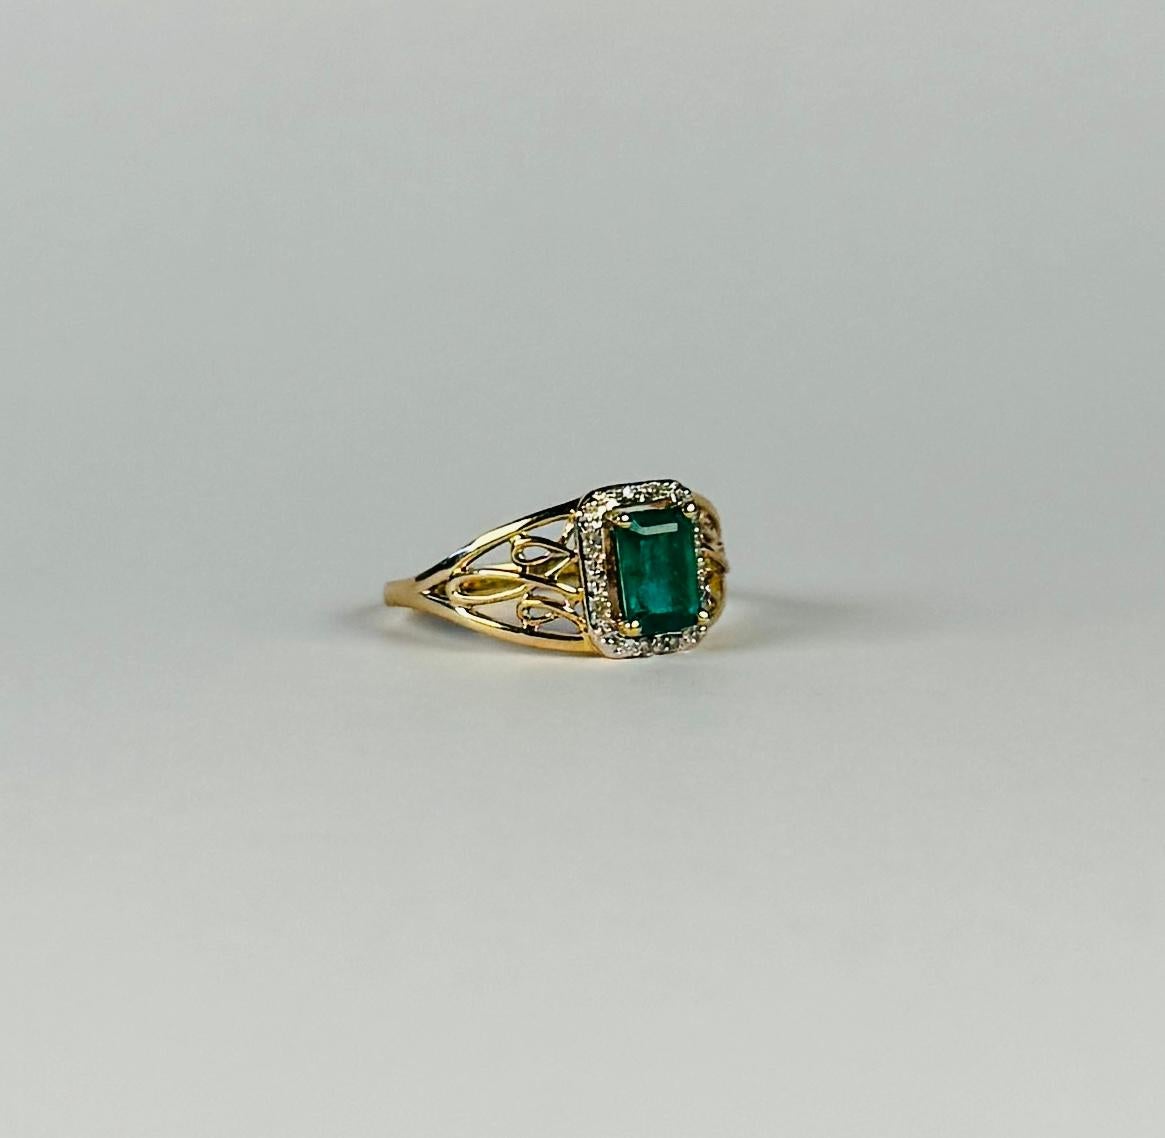 European Ring 14 carat gold with faceted smaragd surrounded with diamonds For Sale 3